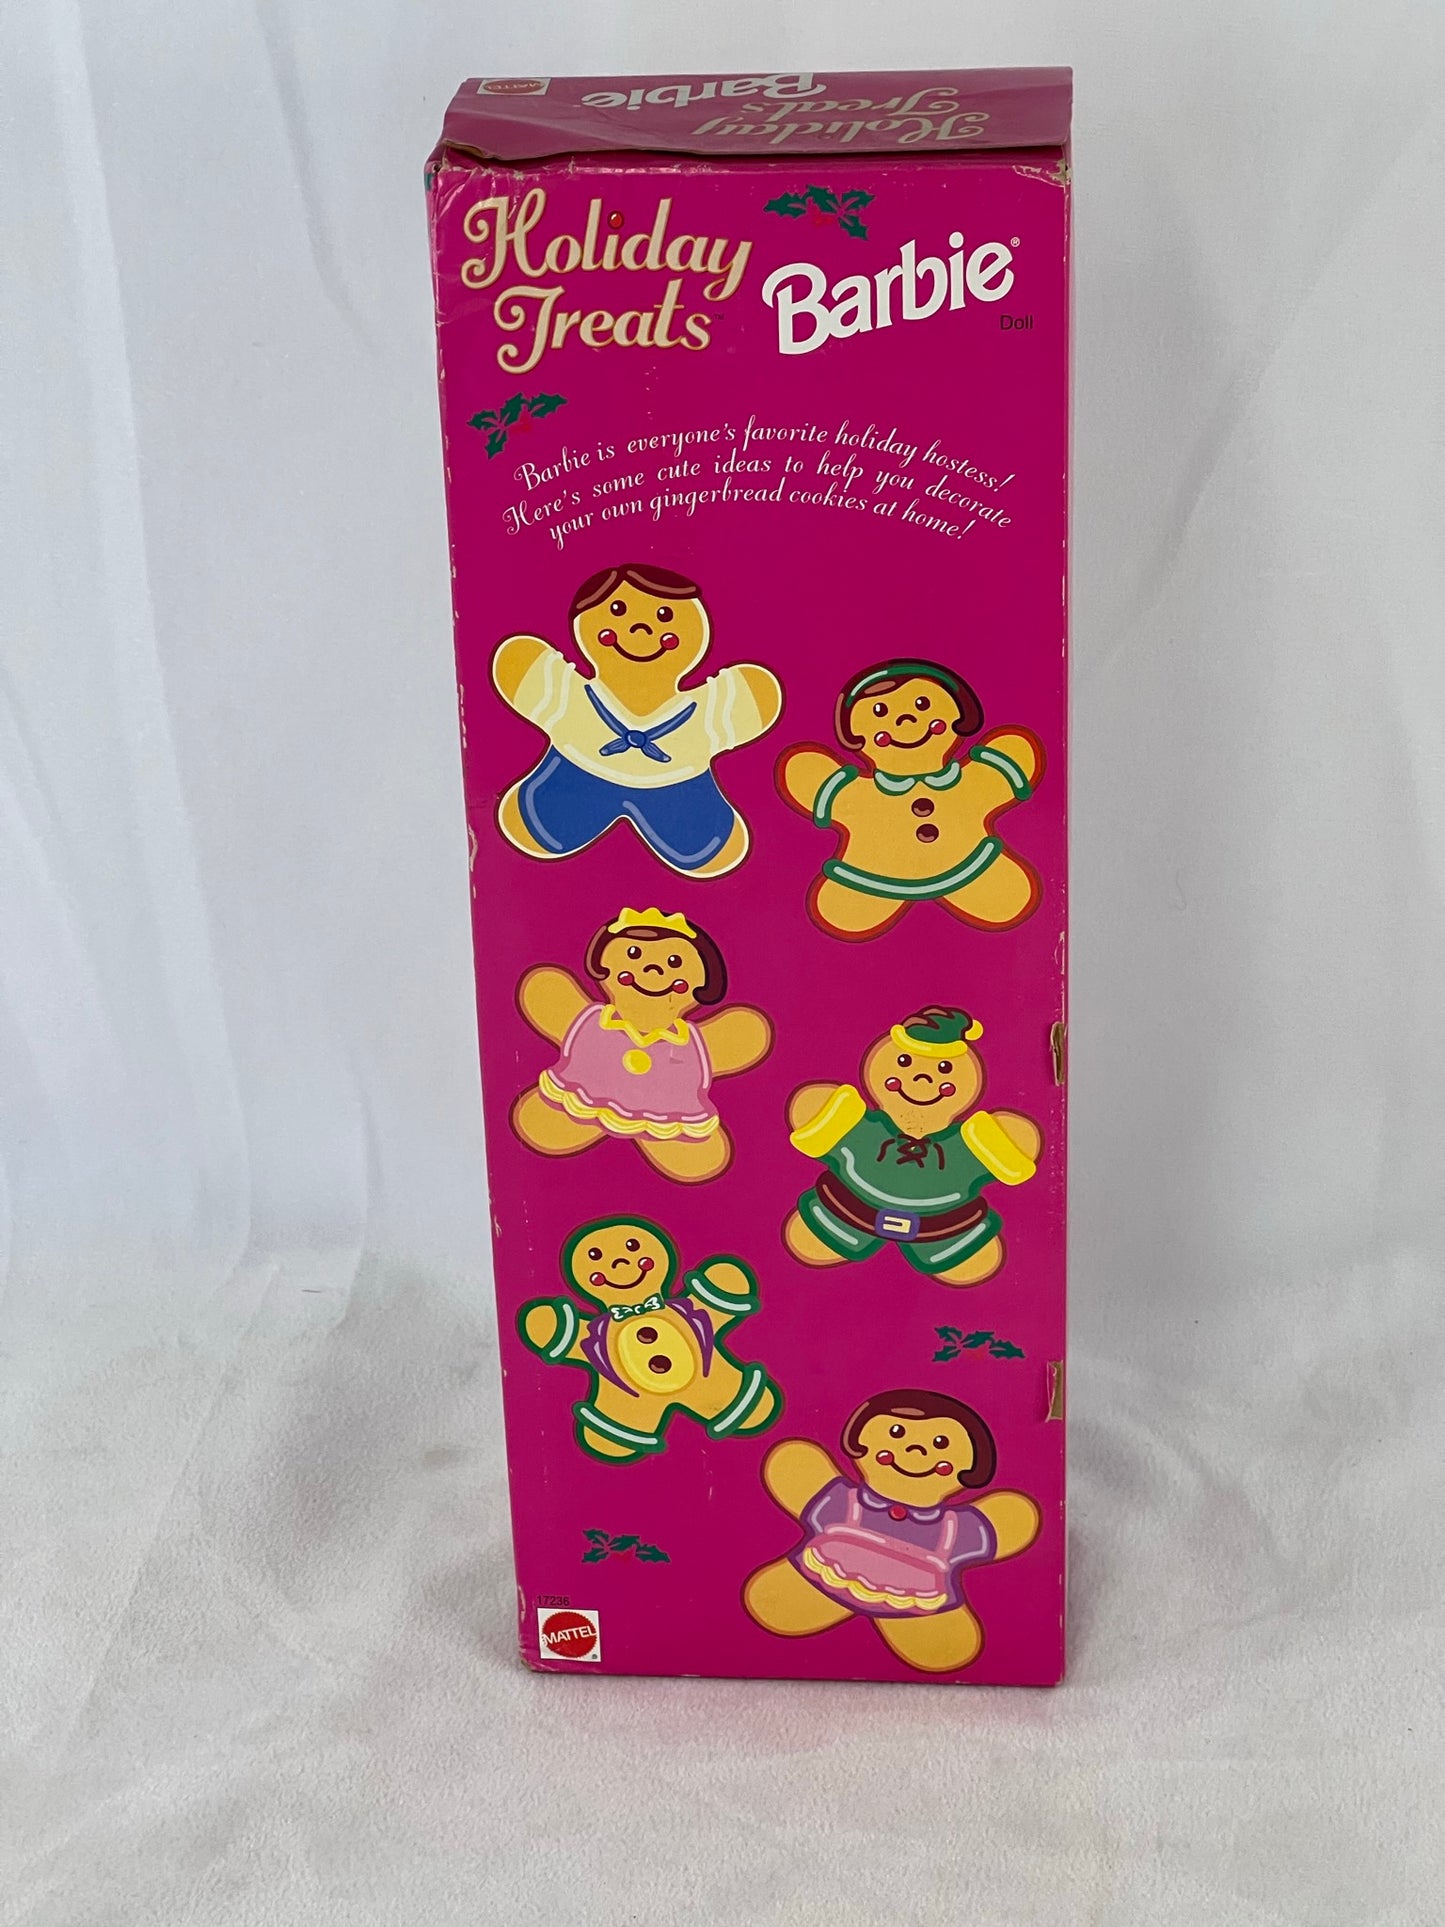 Barbie 1997 Holiday Treats Christmas Gingerbread Barbie Doll New In Box RARE